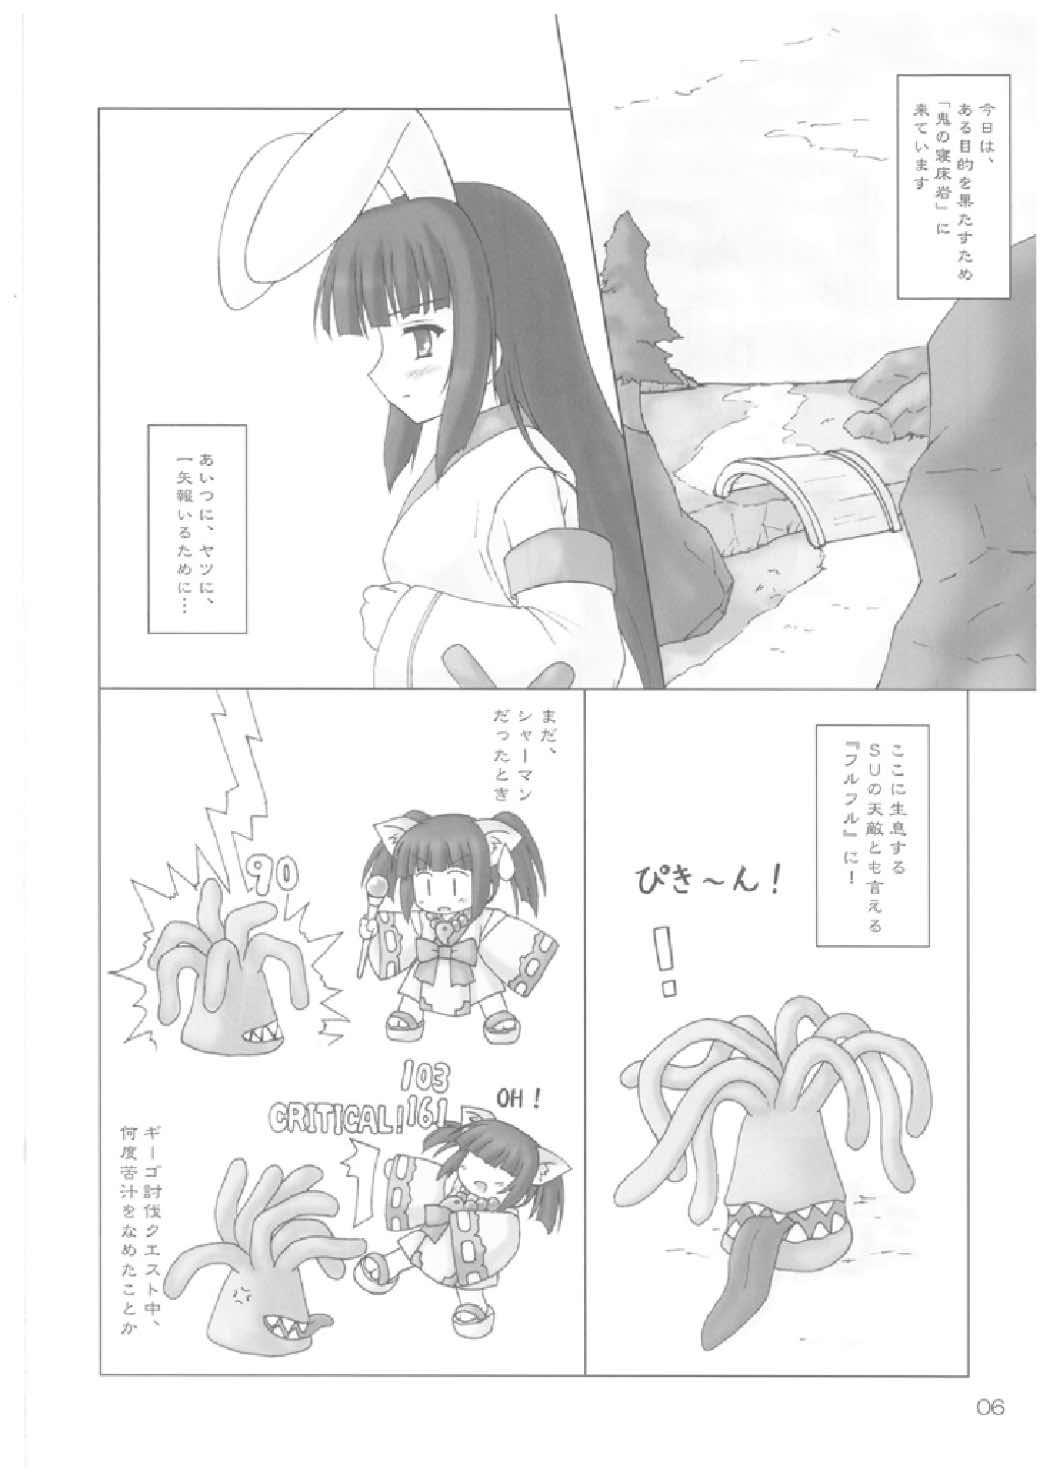 Soloboy Elementaler Confusion Obscenity - Emil chronicle online White Chick - Page 6